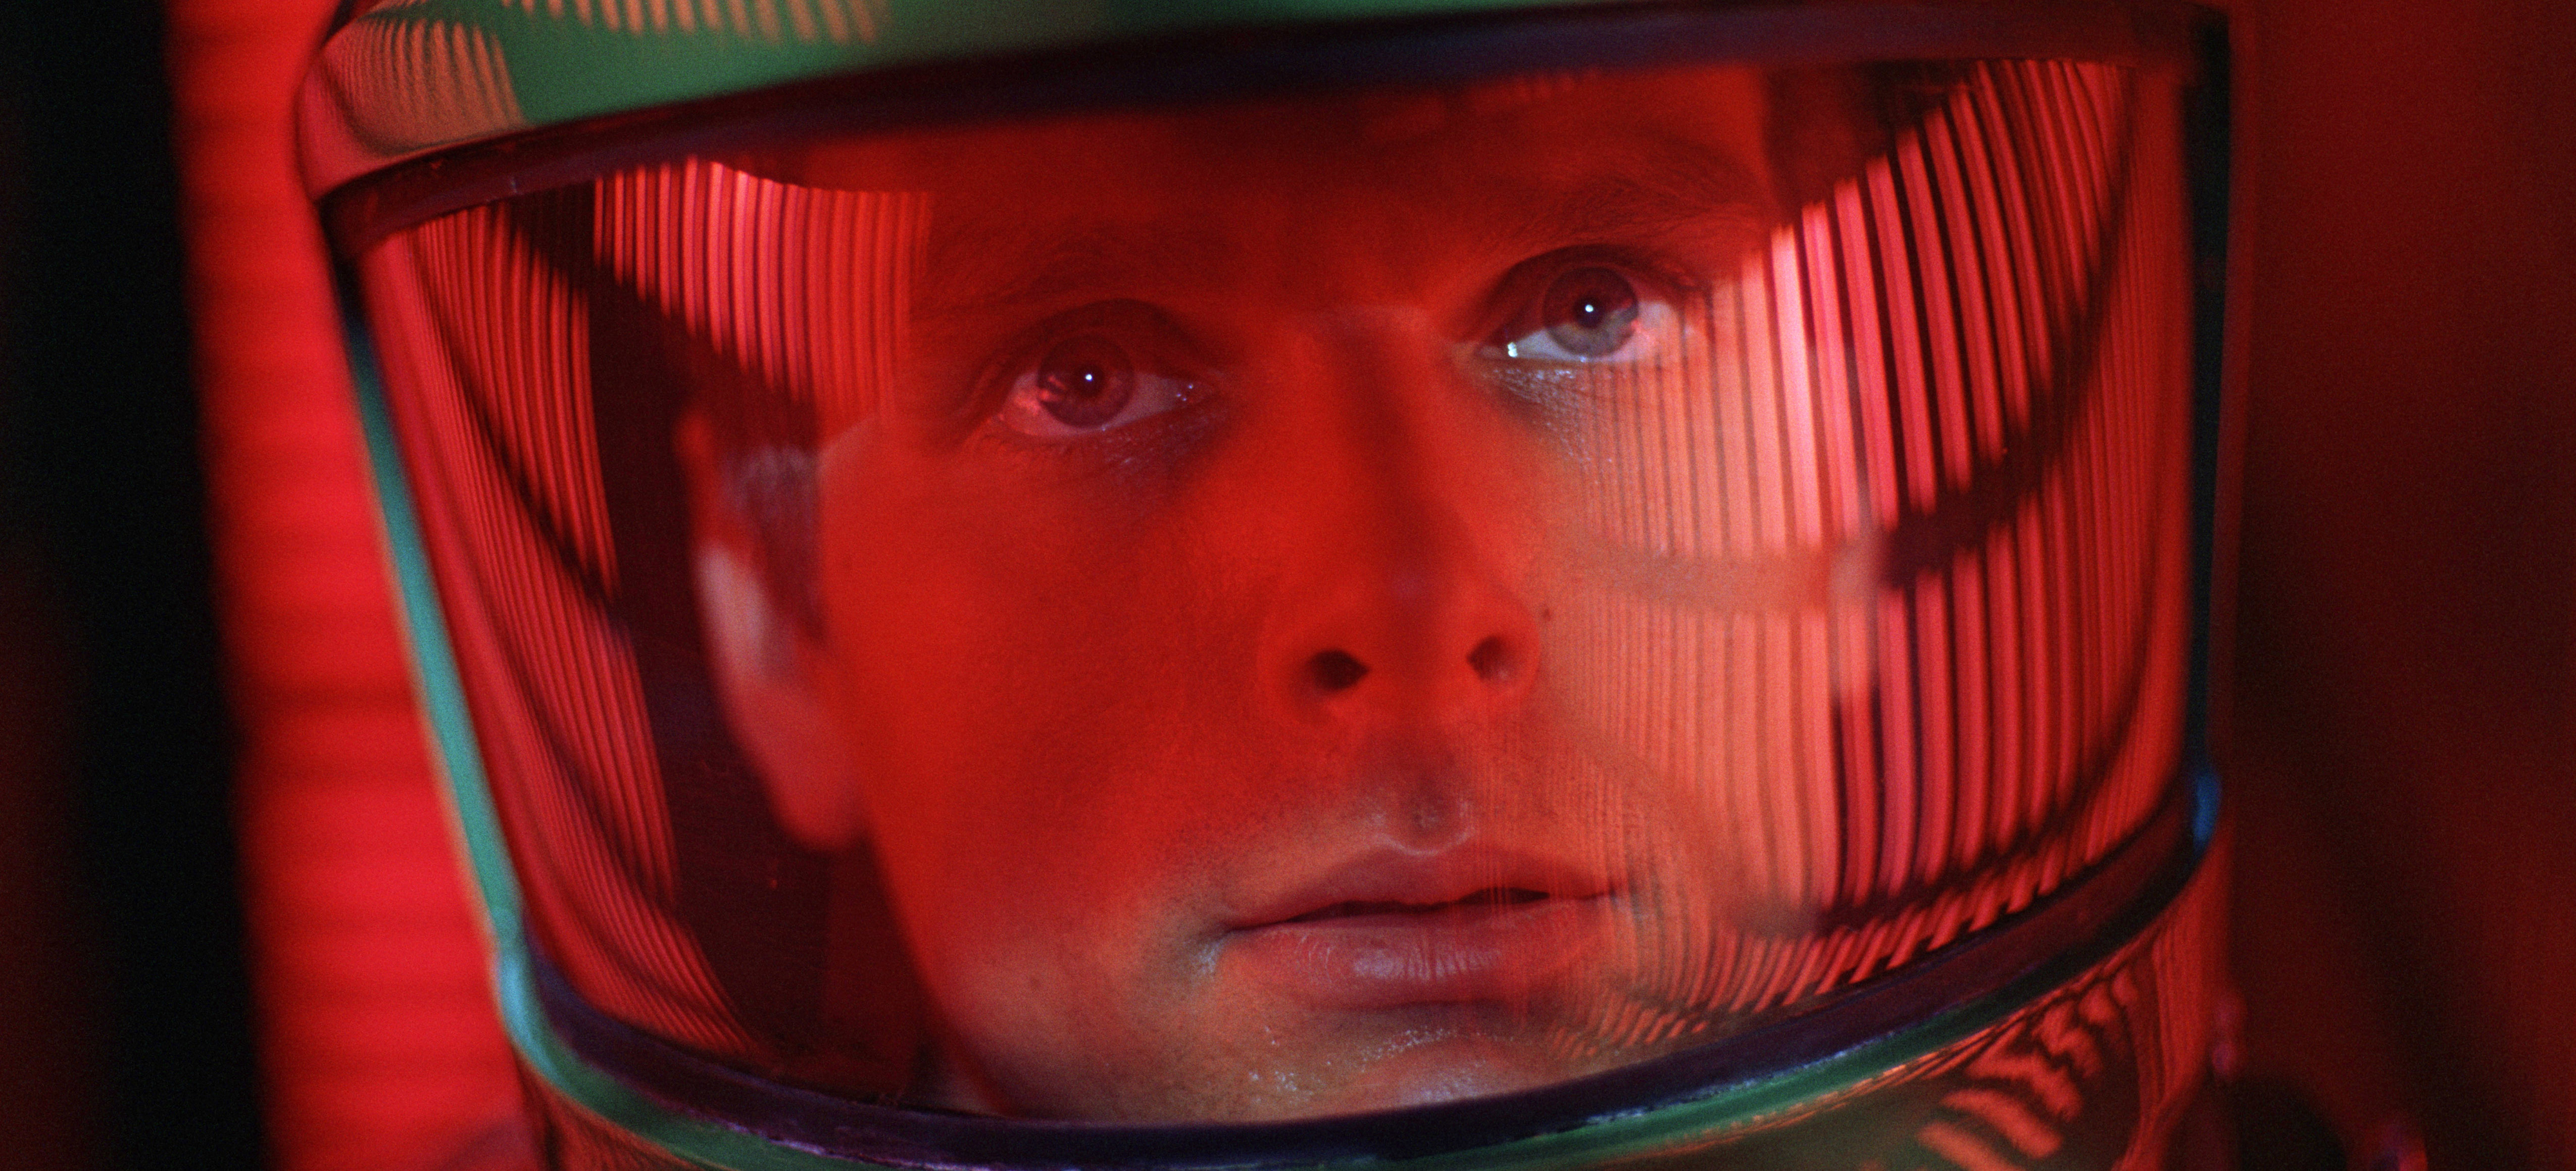 Man in a space helmet with a reflective visor, intense expression, from the film &quot;2001: A Space Odyssey&quot;